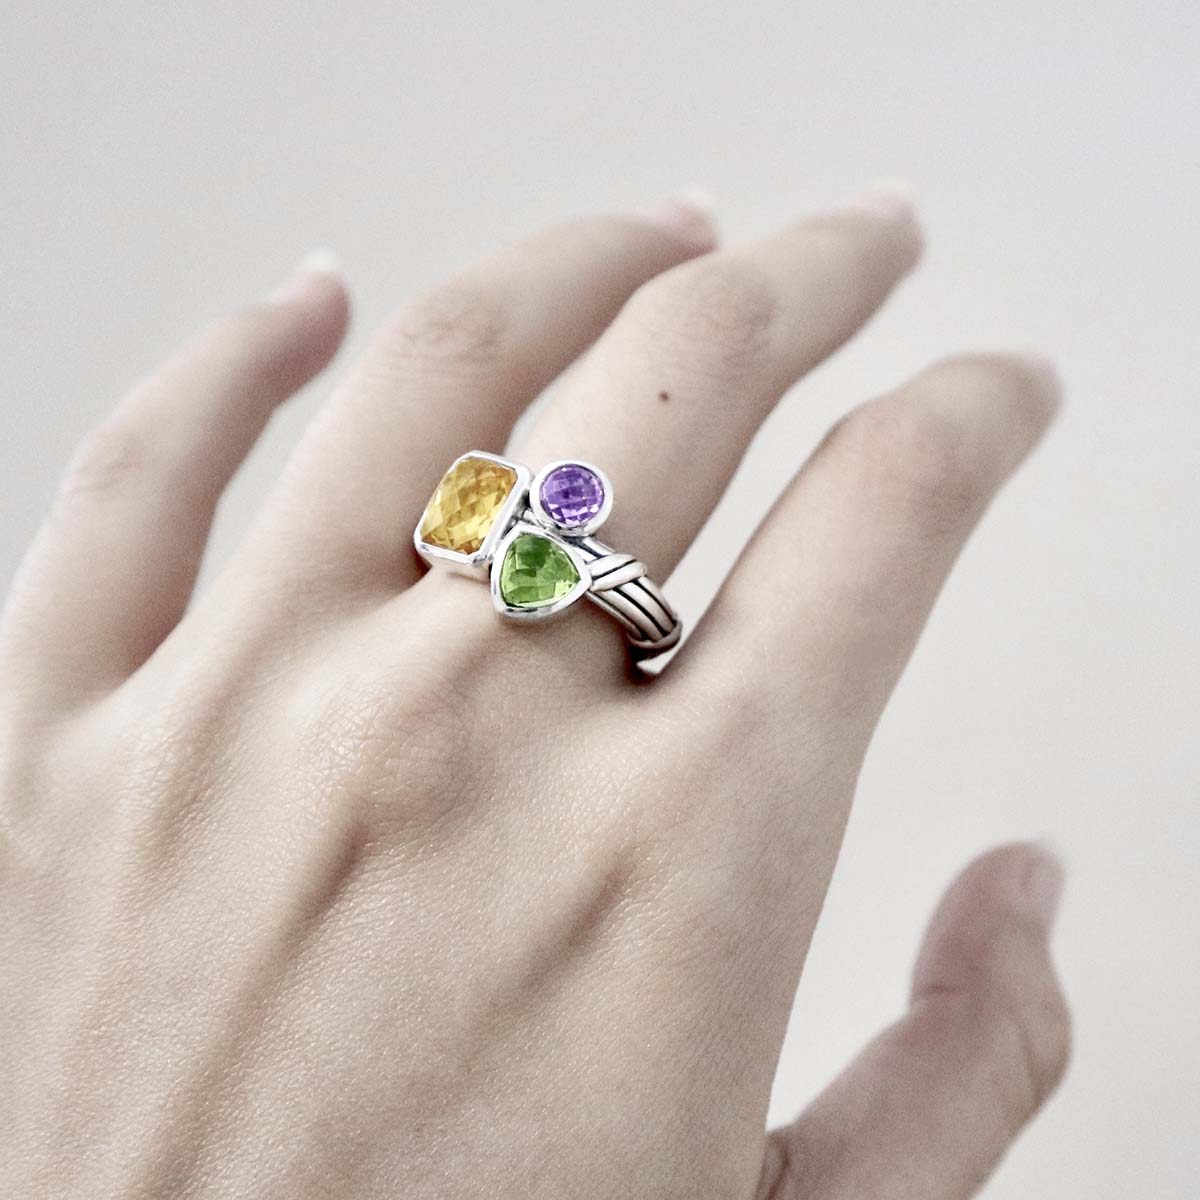 Sorbetto Multicolor Gemstone Ring in sterling silver with citrine, peridot and amethyst